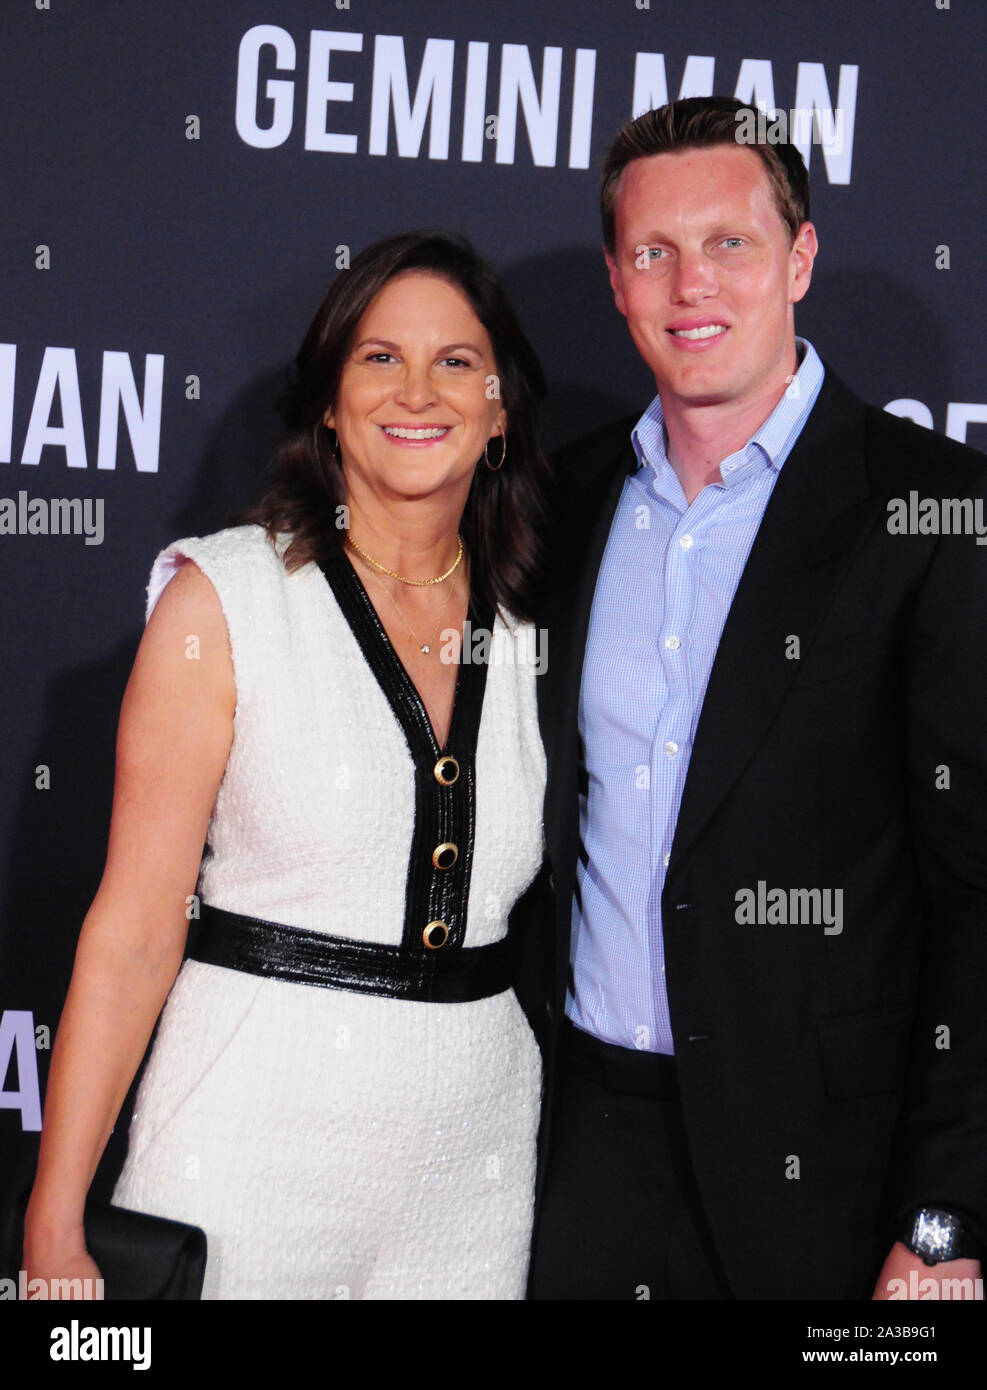 Hollywood, California, USA 6th October 2019 Producers Dana Goldberg and David Ellison attend Paramount Pictures Presents The Premiere of 'Gemini Man' on October 6, 2019 at TCL Chinese Theatre in Hollywood, California, USA. Photo by Barry King/Alamy Live News Stock Photo